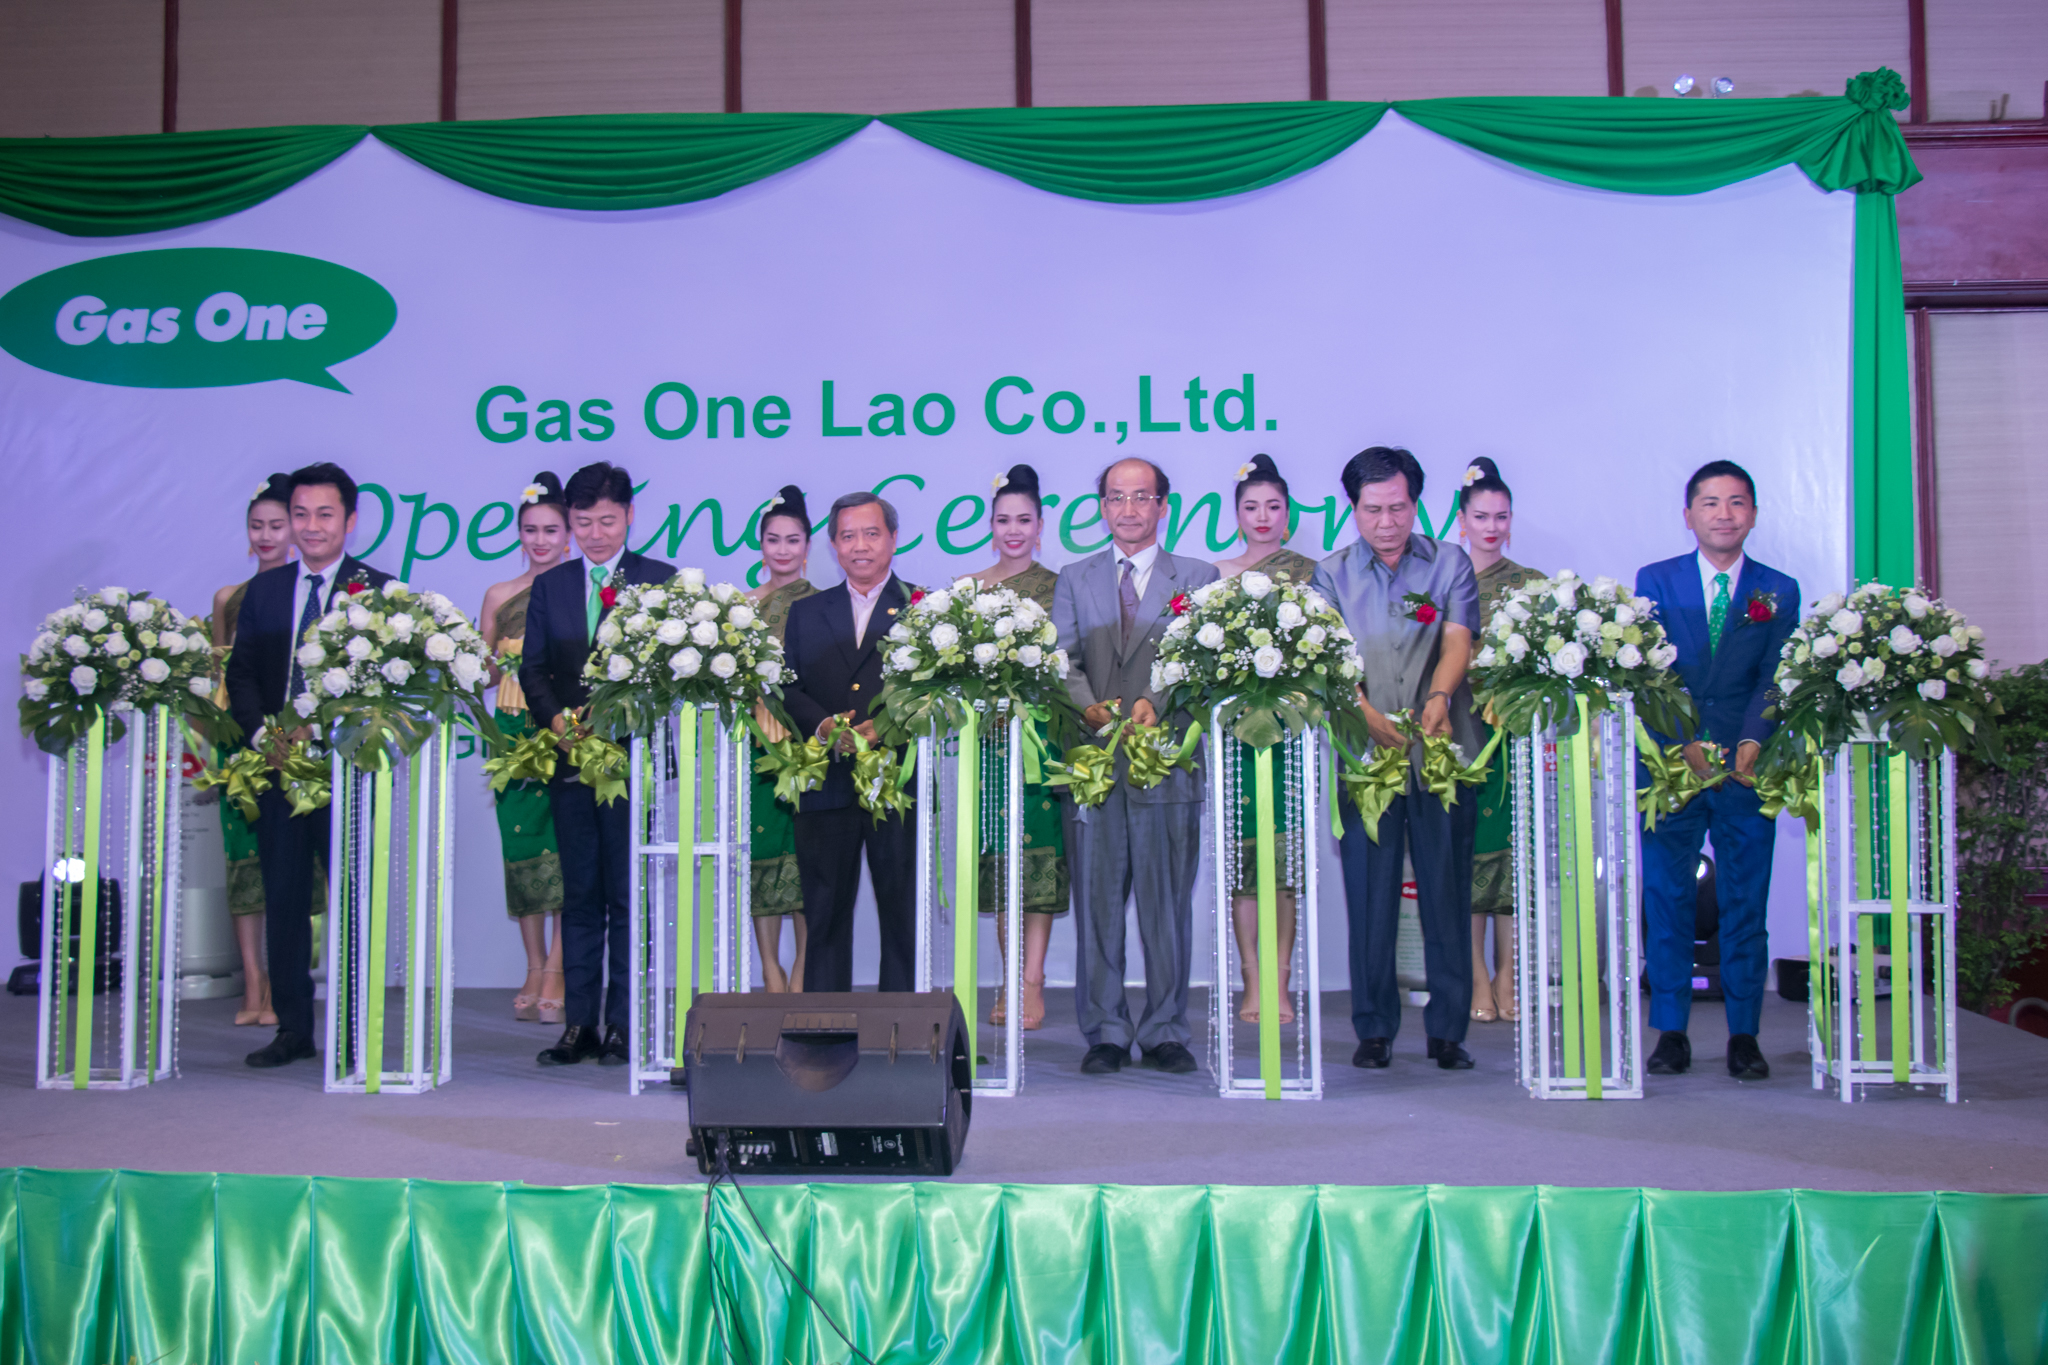 Grand Opening Ceremony of Gas One Lao Co., Ltd.